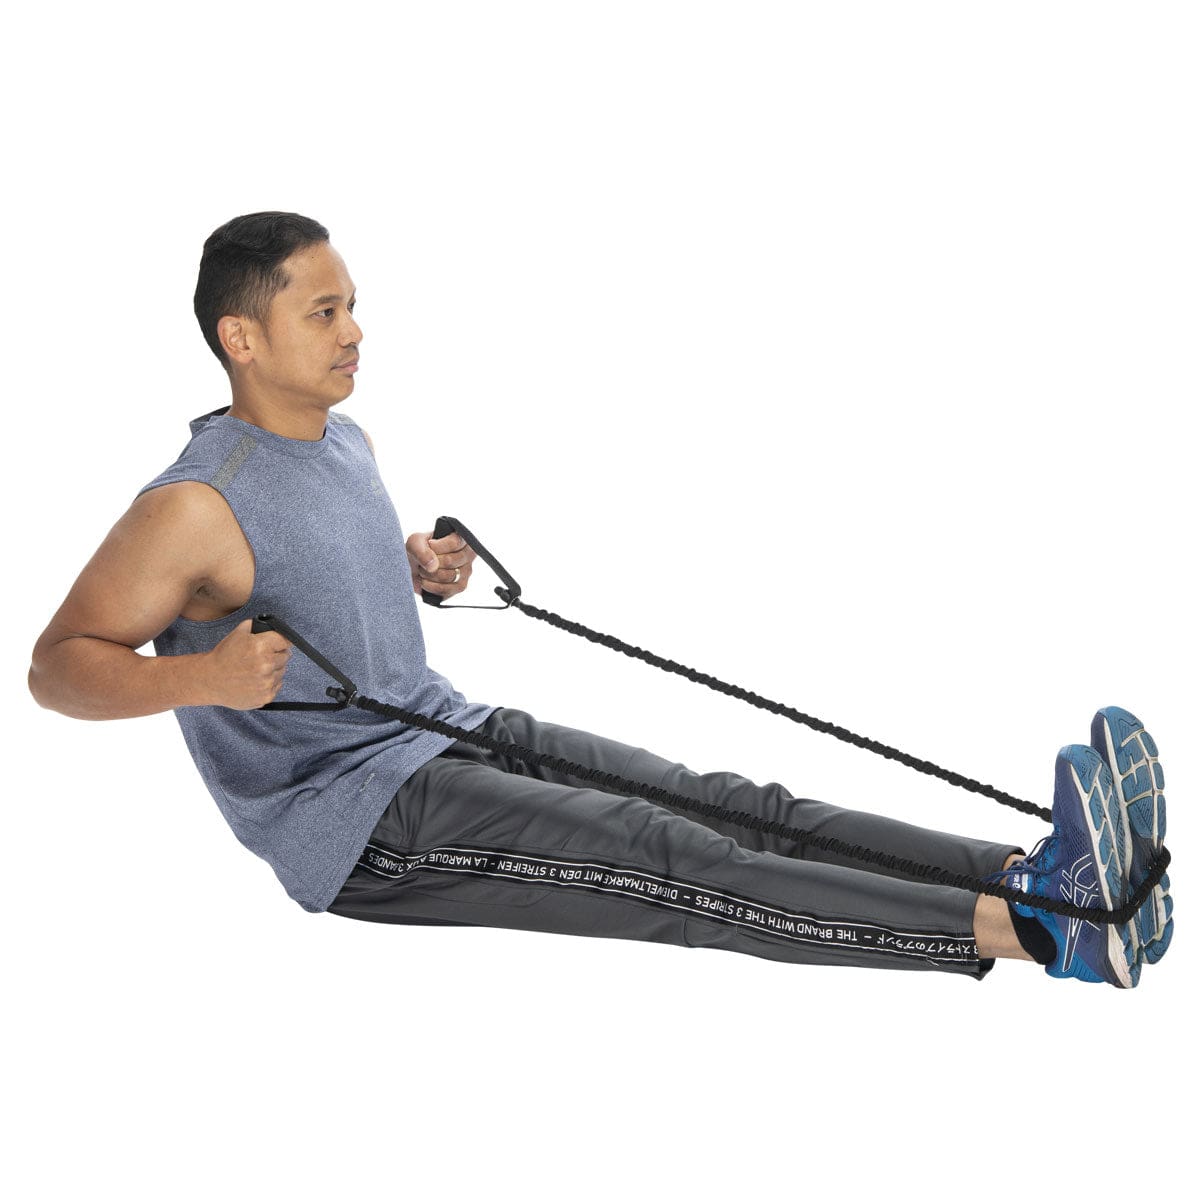 Bungee Stretch Resistance Band - Displayer of 6